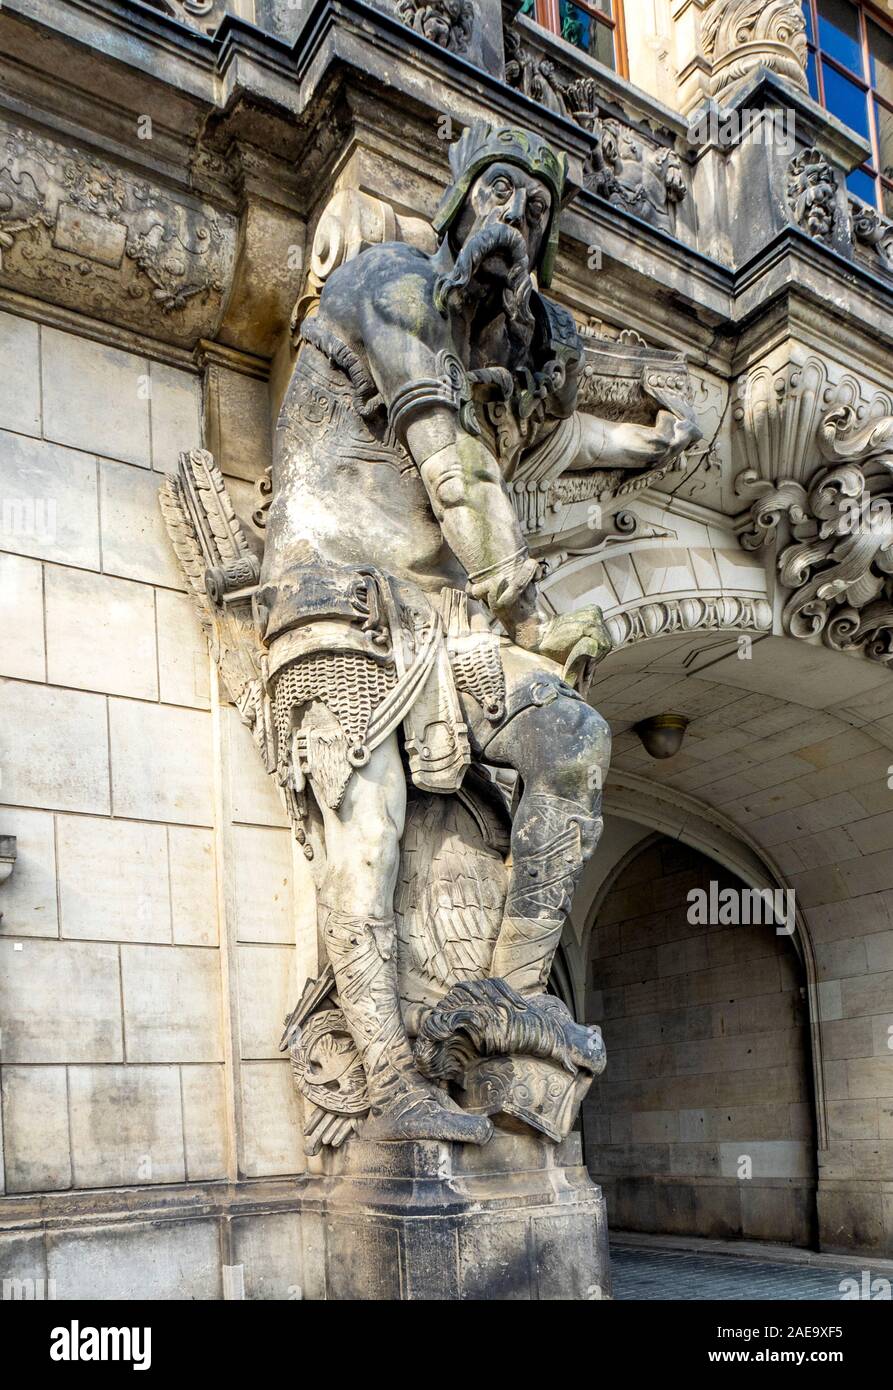 Stone sculpture statue beside archway of Georgentor Dresden Castle Royal Palace Dresden Saxony Germany. Stock Photo